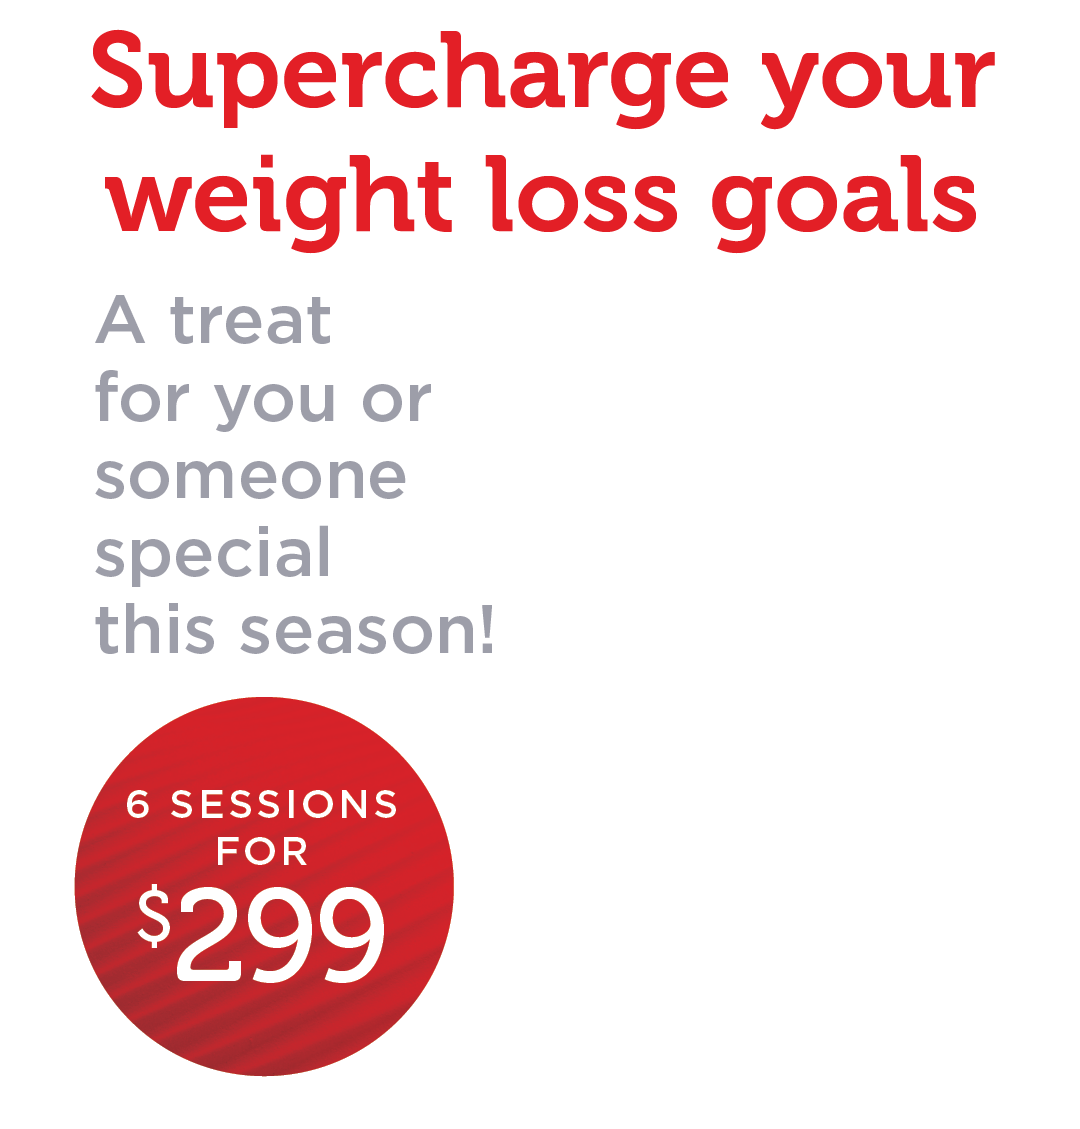 Superhcarge your weight loss goals